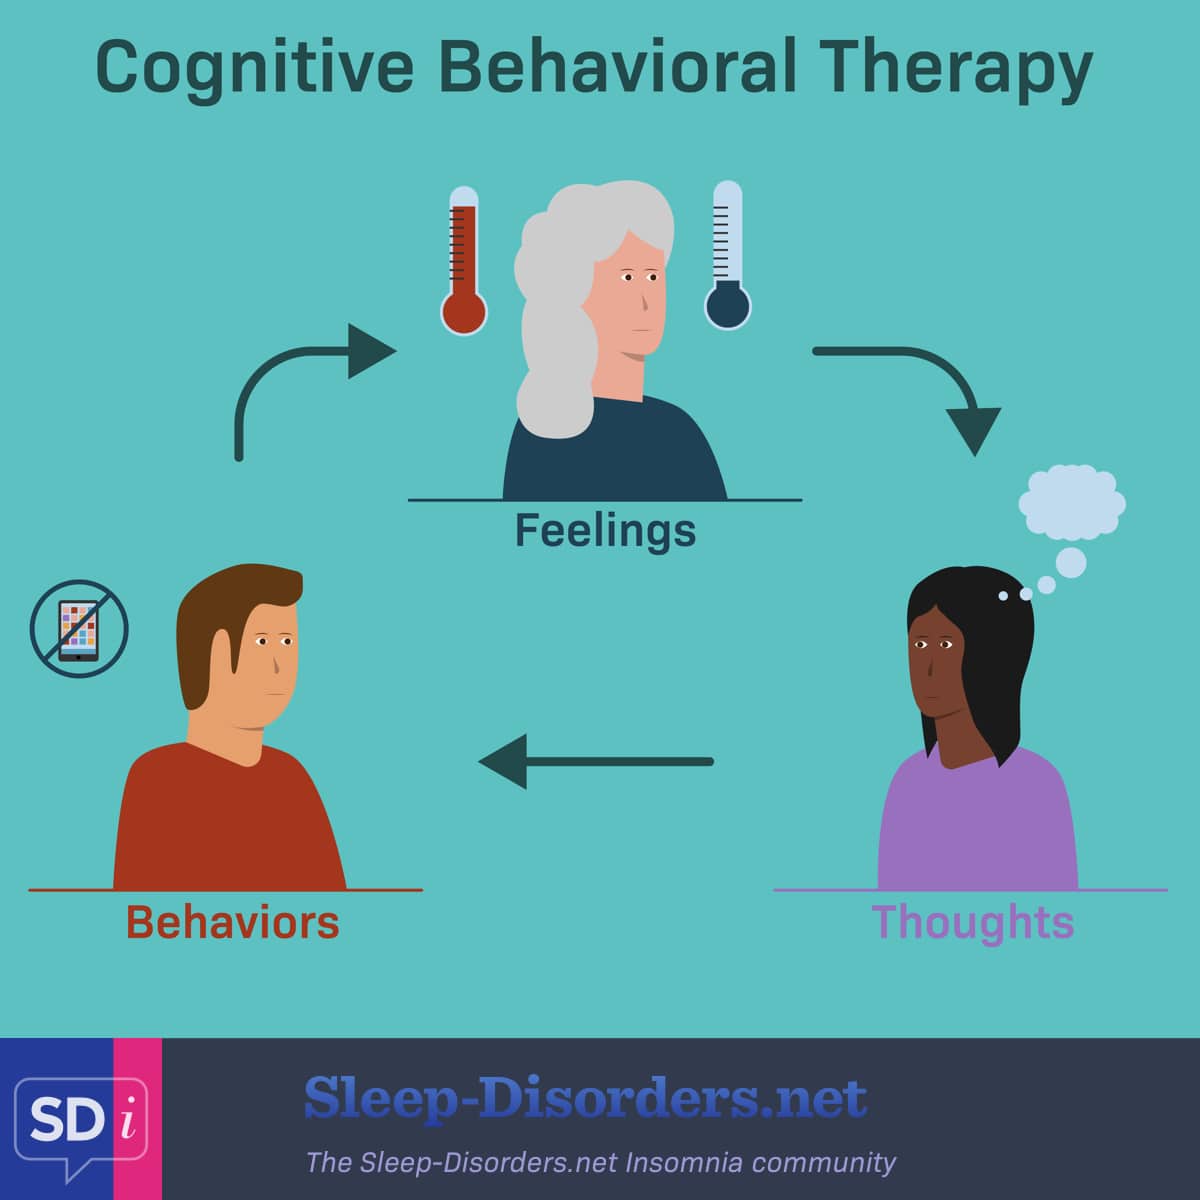 Cognitive behavioral therapy for insomnia explores the relationships between feelings, thoughts, and behaviors